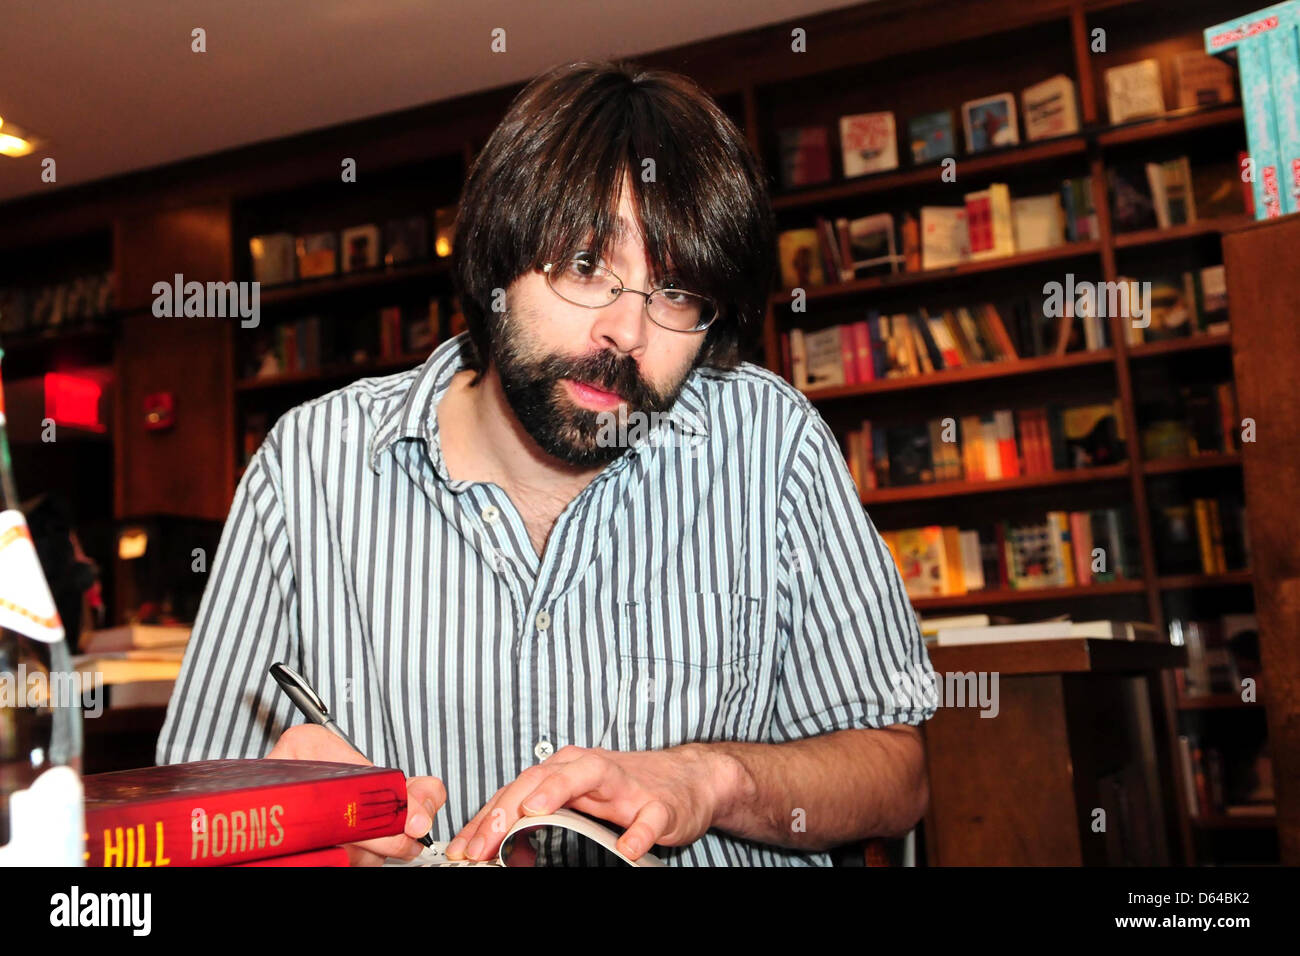 Author Joe Hill signs copies of his new book 'Horns' at Books & Books. Hill born Joseph Hillstrom King is the son of horror Stock Photo